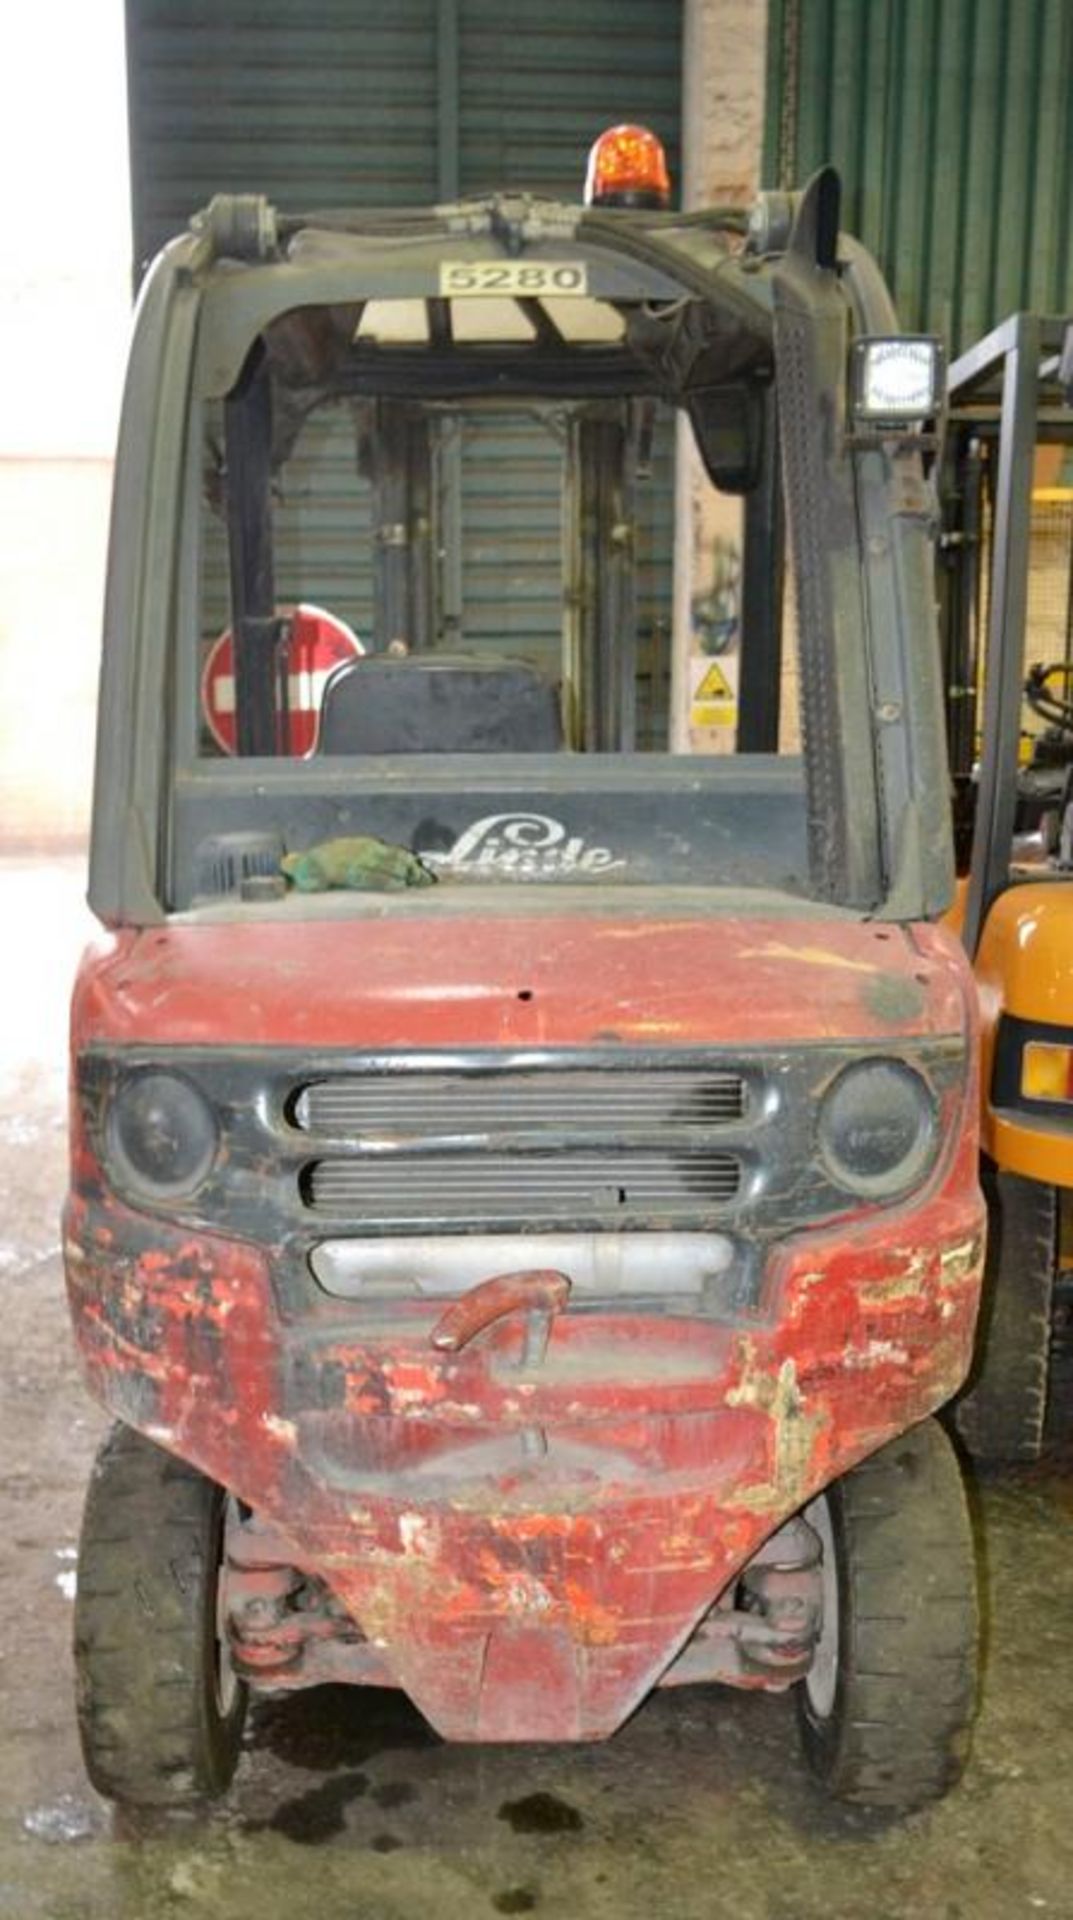 1 x 2003 Lansing Linde H25D Forklift - CL464 - Location: Liverpool L19 - Used In Working Condition - Bild 17 aus 30